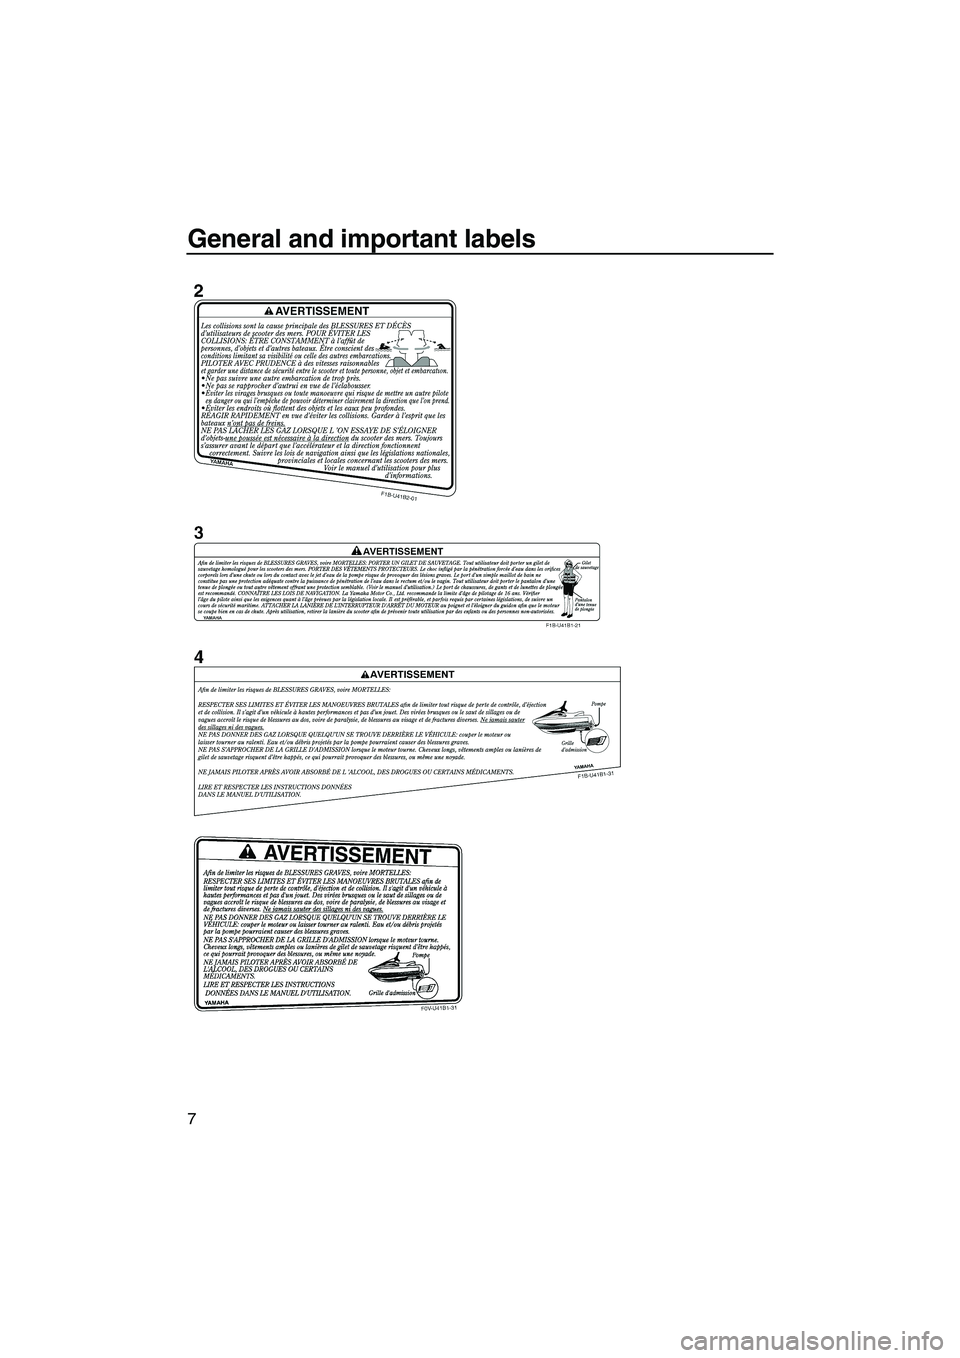 YAMAHA VX CRUISER 2007 User Guide General and important labels
7
UF1K72E0.book  Page 7  Wednesday, August 2, 2006  10:43 AM 